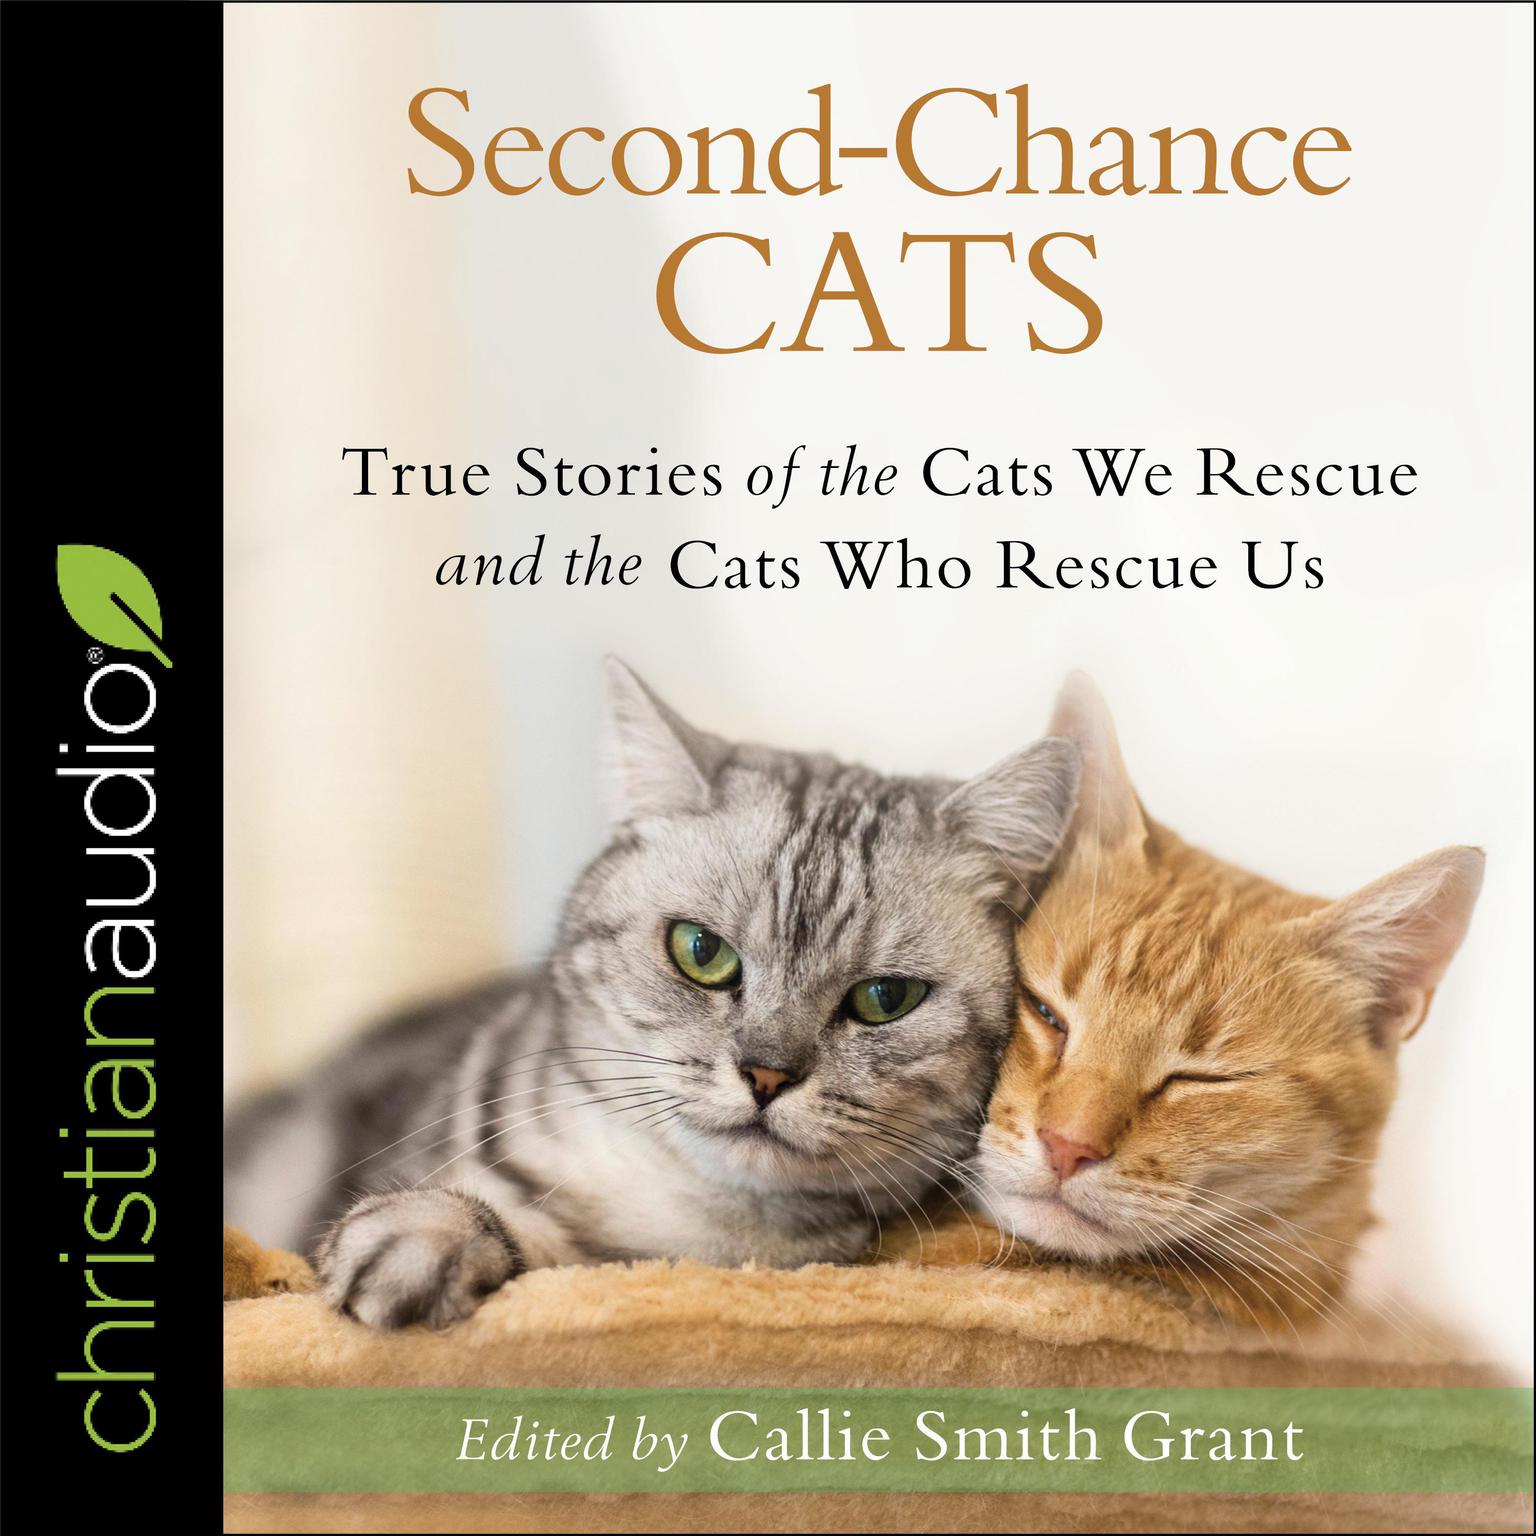 Second-Chance Cats: True Stories of the Cats We Rescue and the Cats Who Rescue Us Audiobook, by Callie Smith Grant